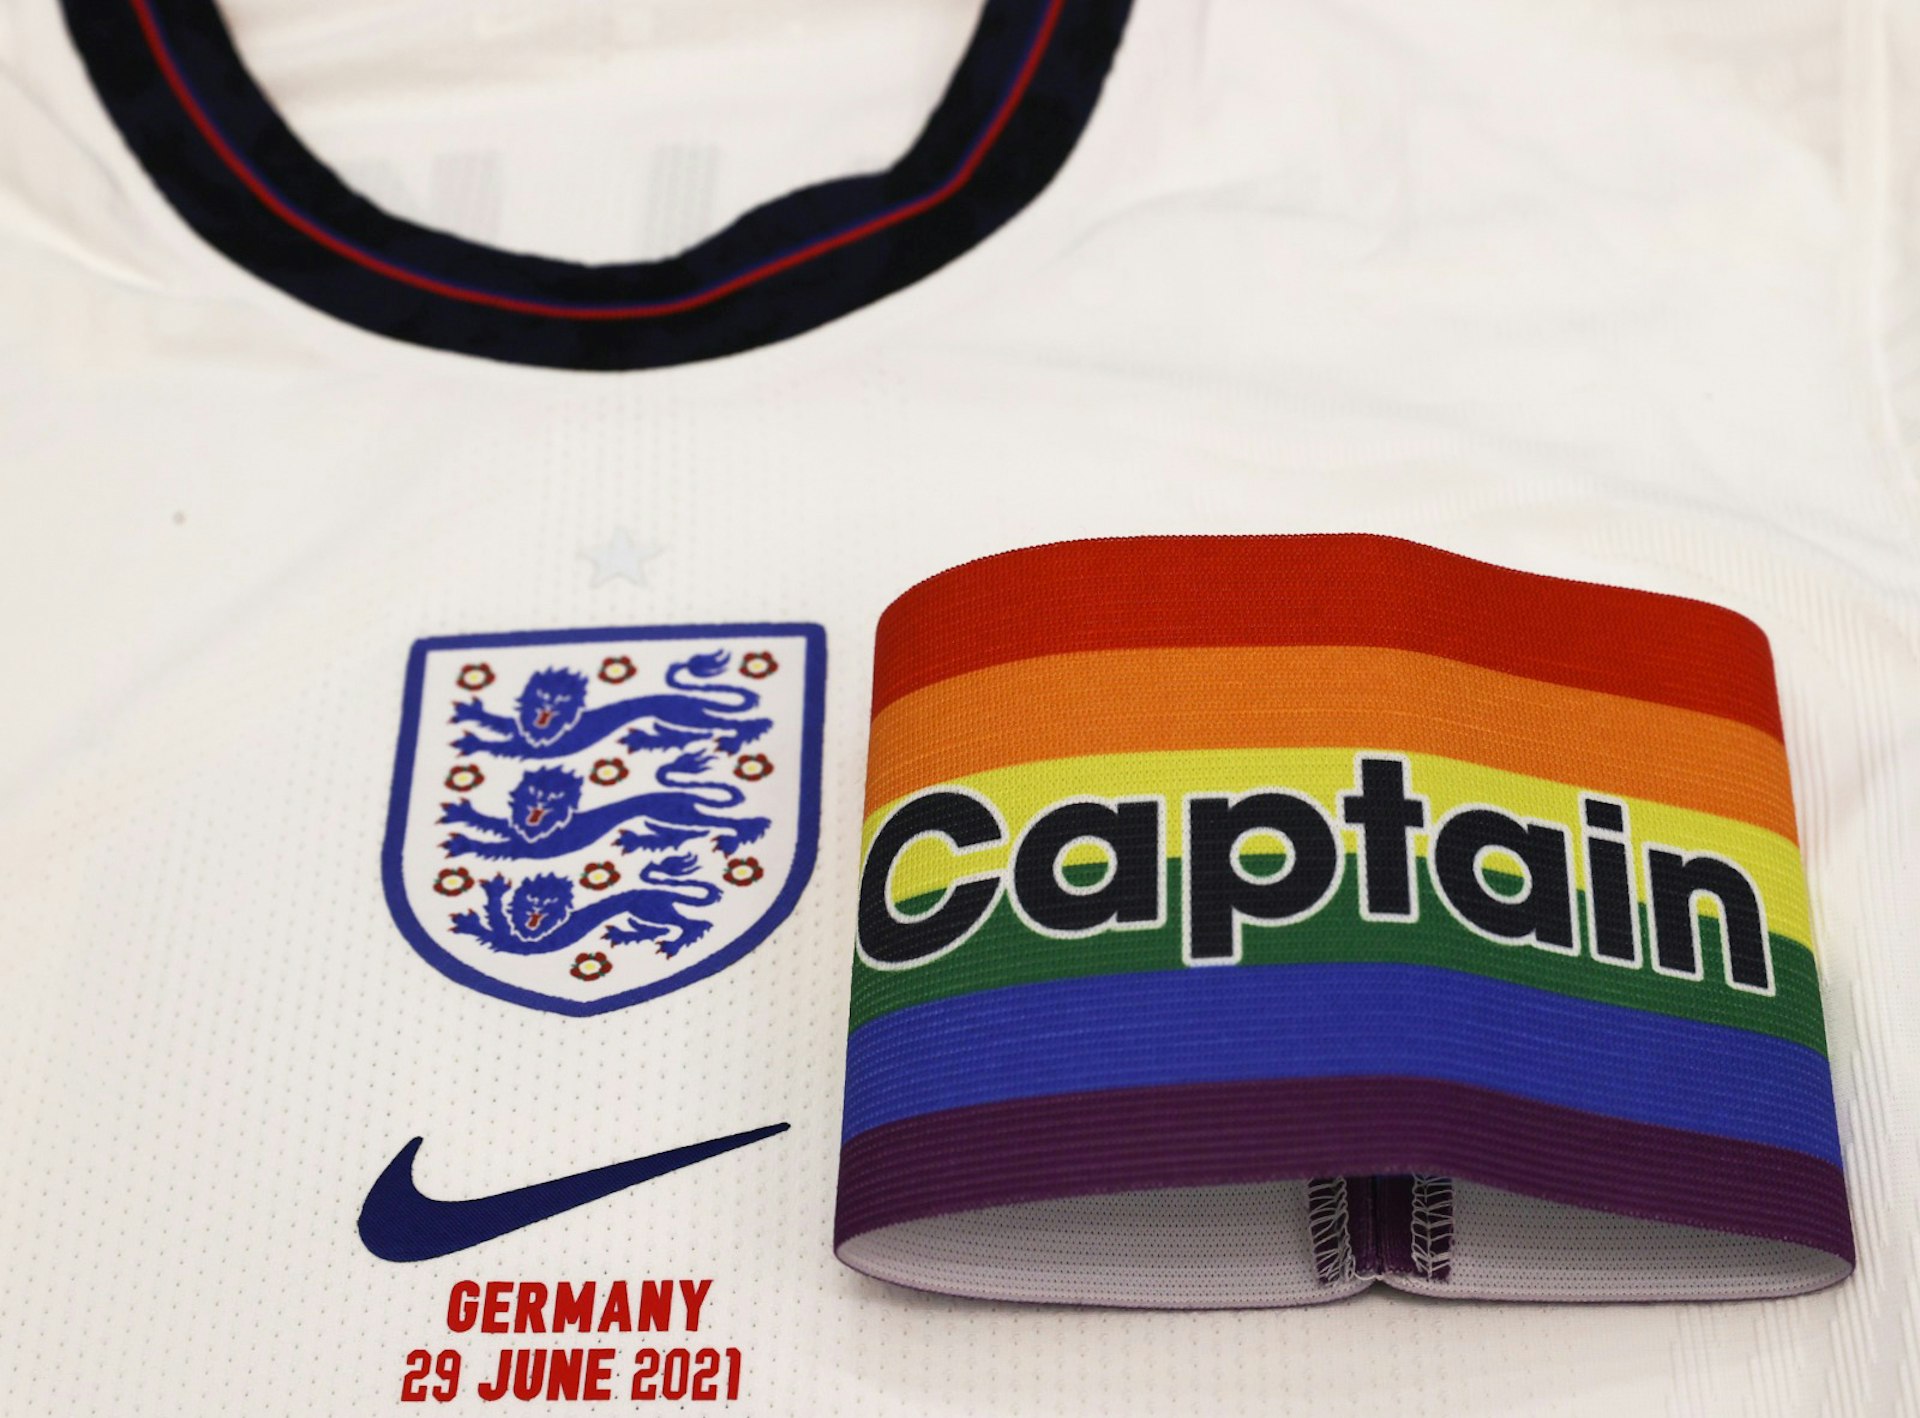 For LGBTQ+ football fans, even more must be done